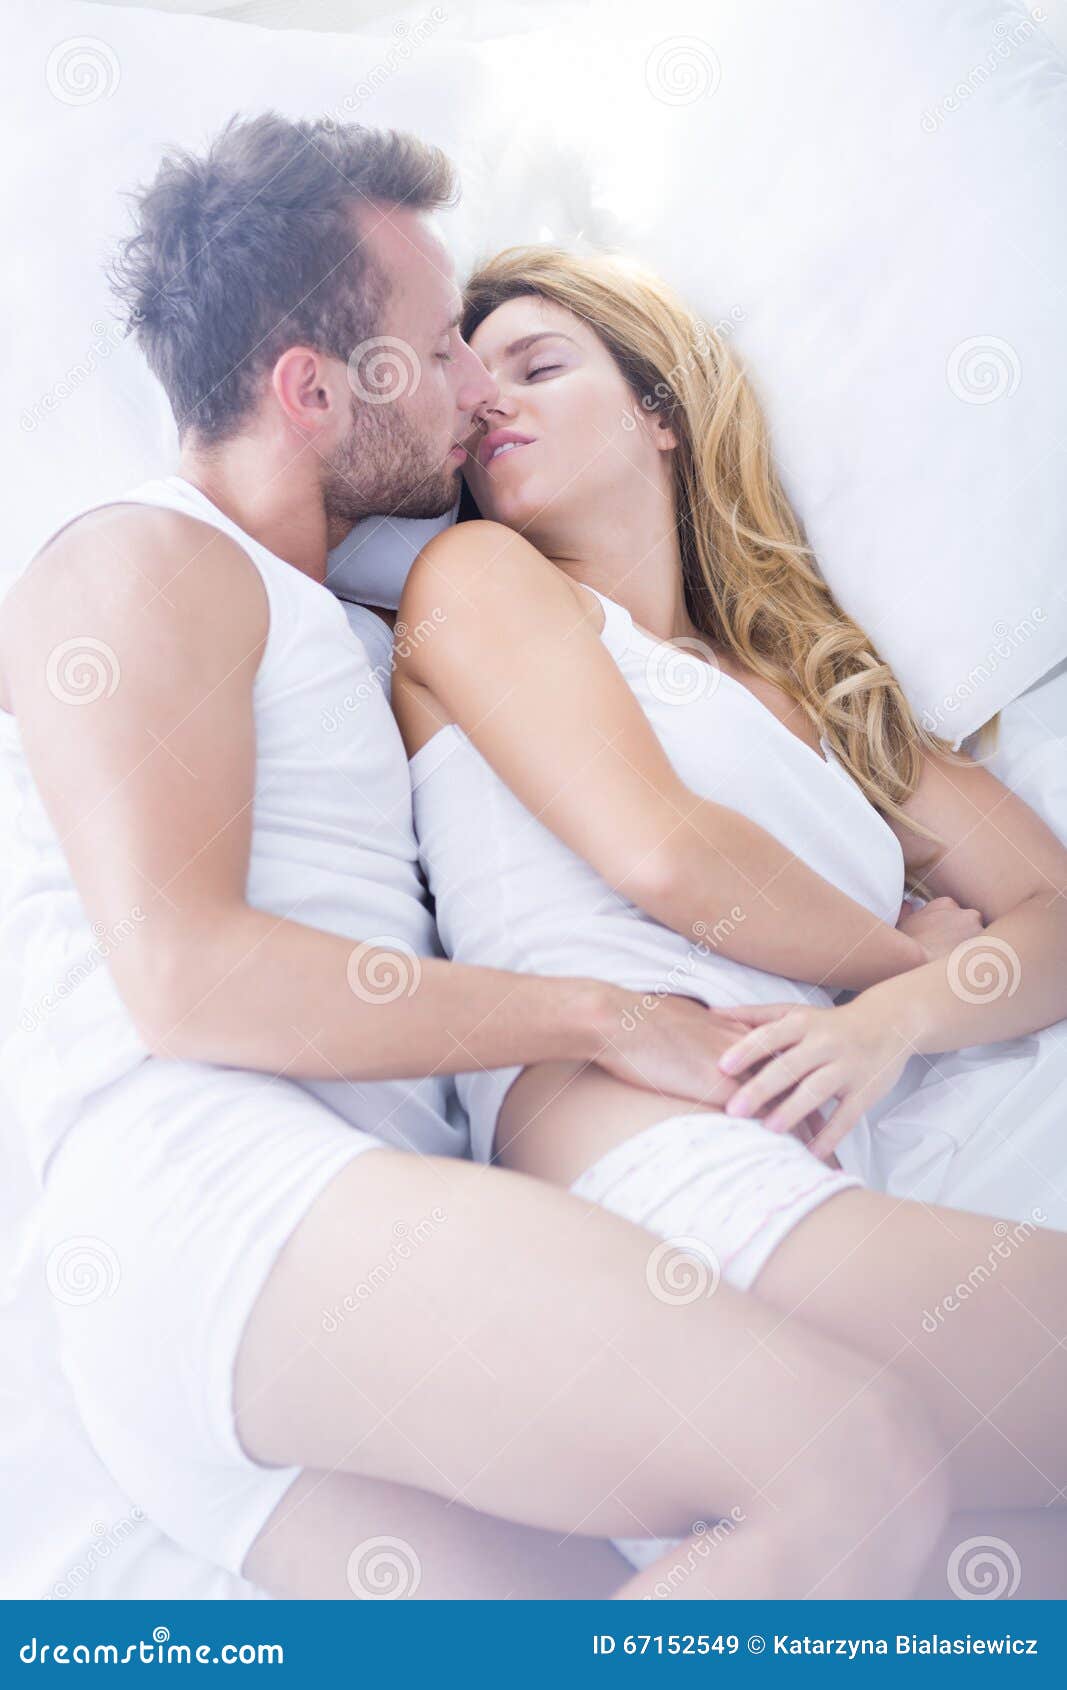 Kissing in bed stock image picture